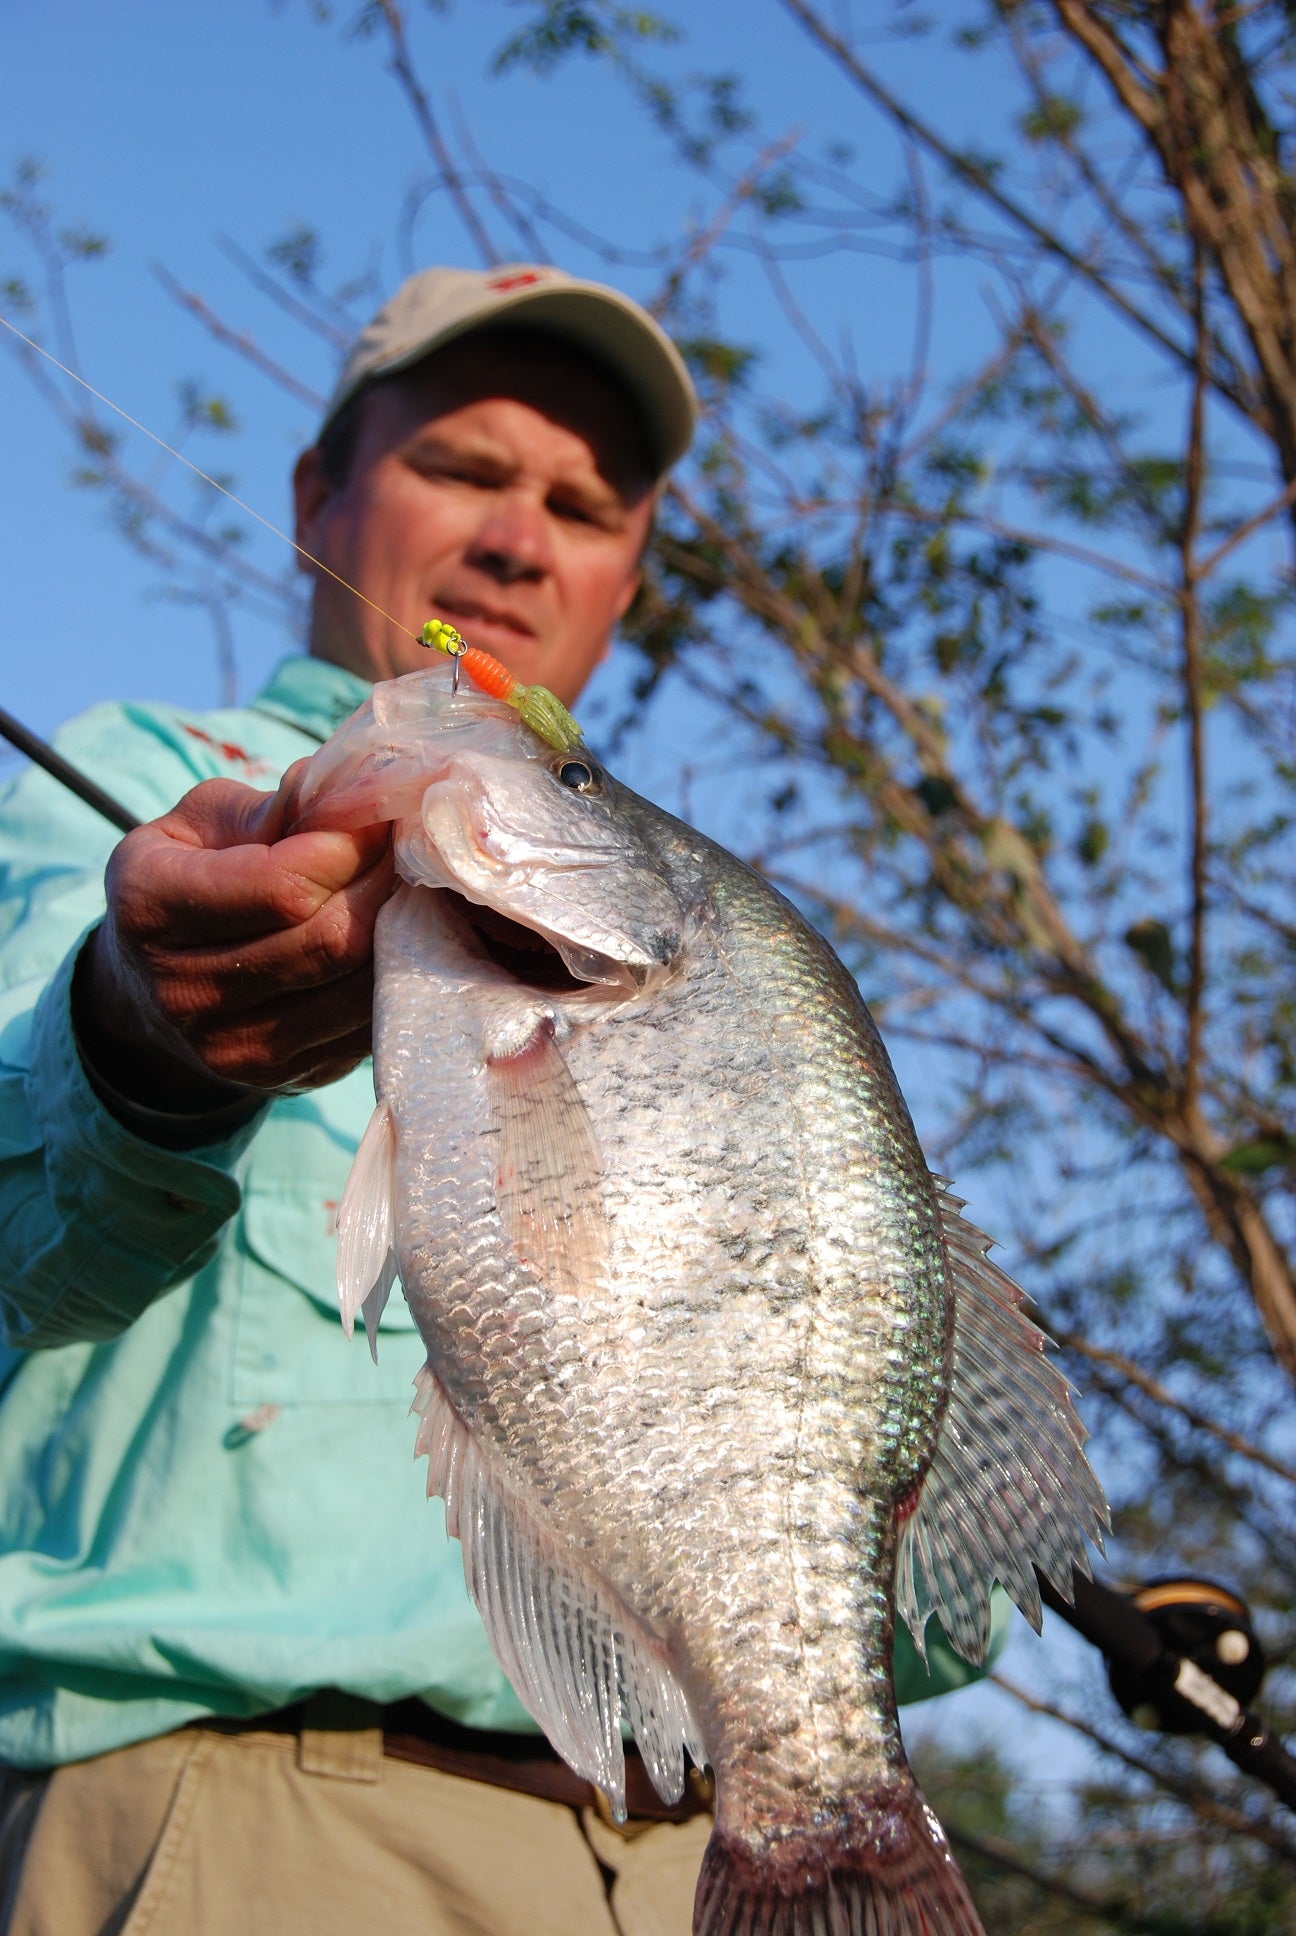 Kent Driscoll On Using the Garmin Panoptix Live Scope to Catch Crappie - Part 2